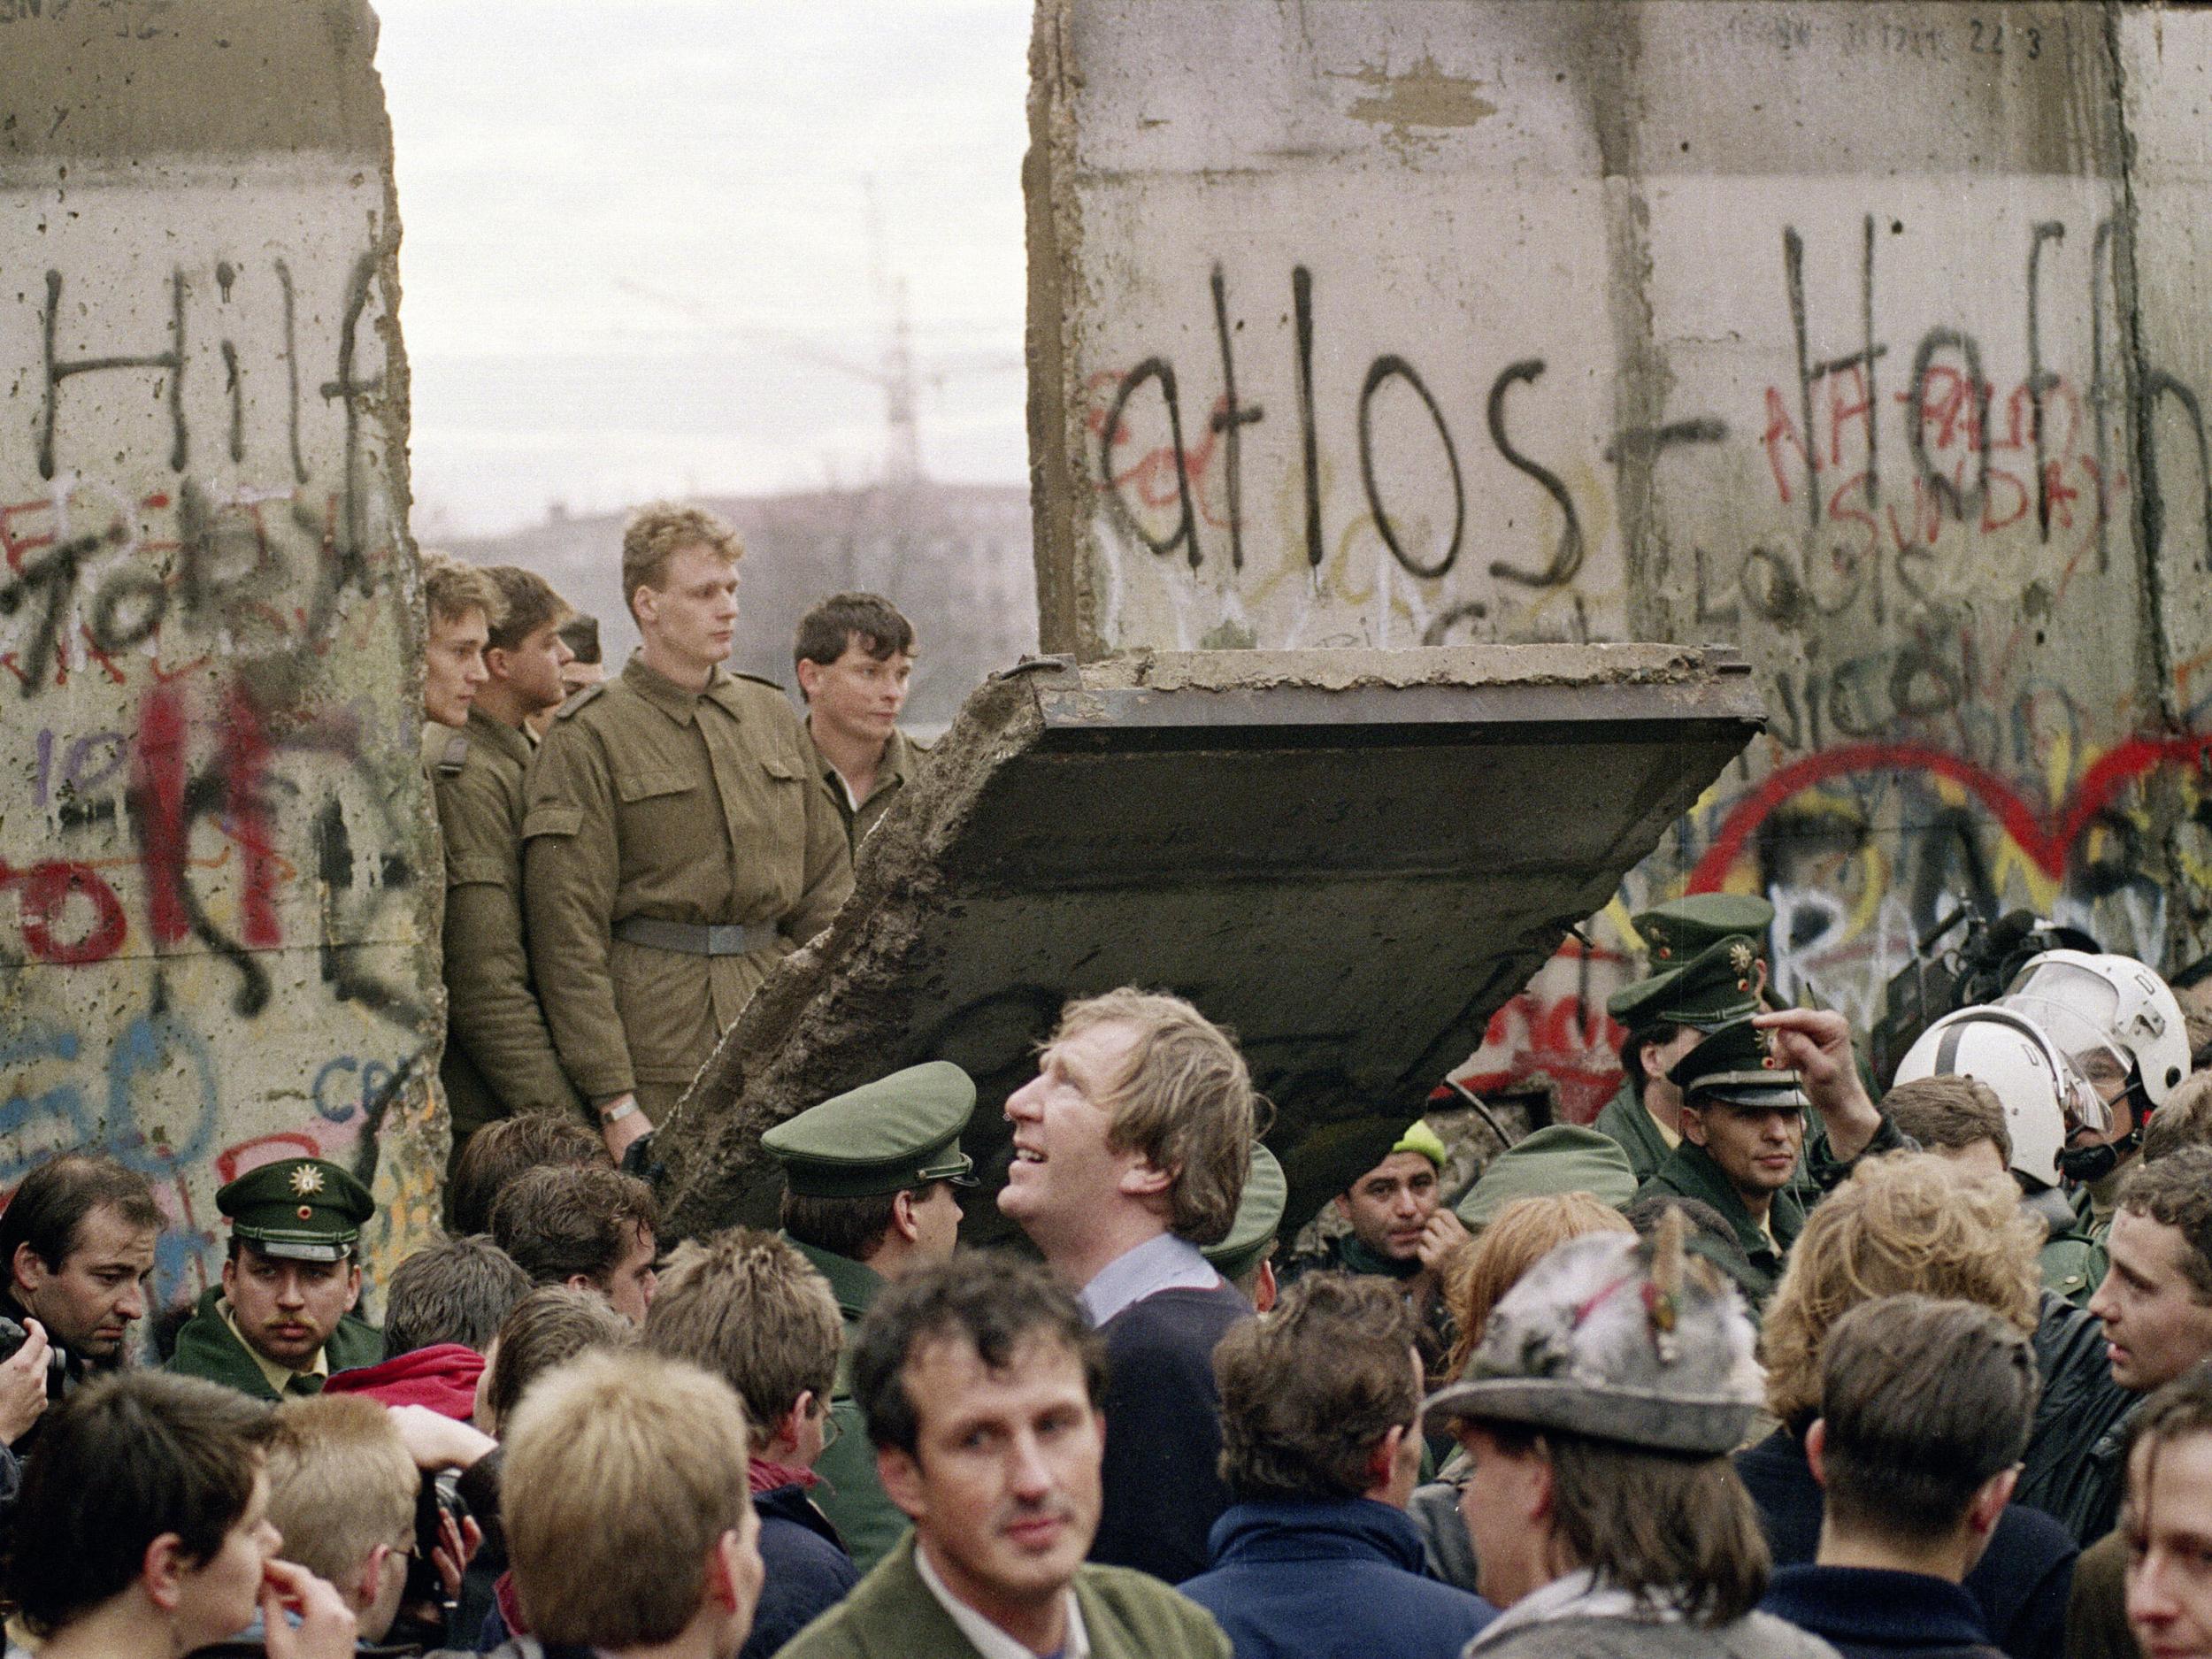 11 November 1989: East German border guards demolish a section of the wall to open a new crossing point between East and West Berlin